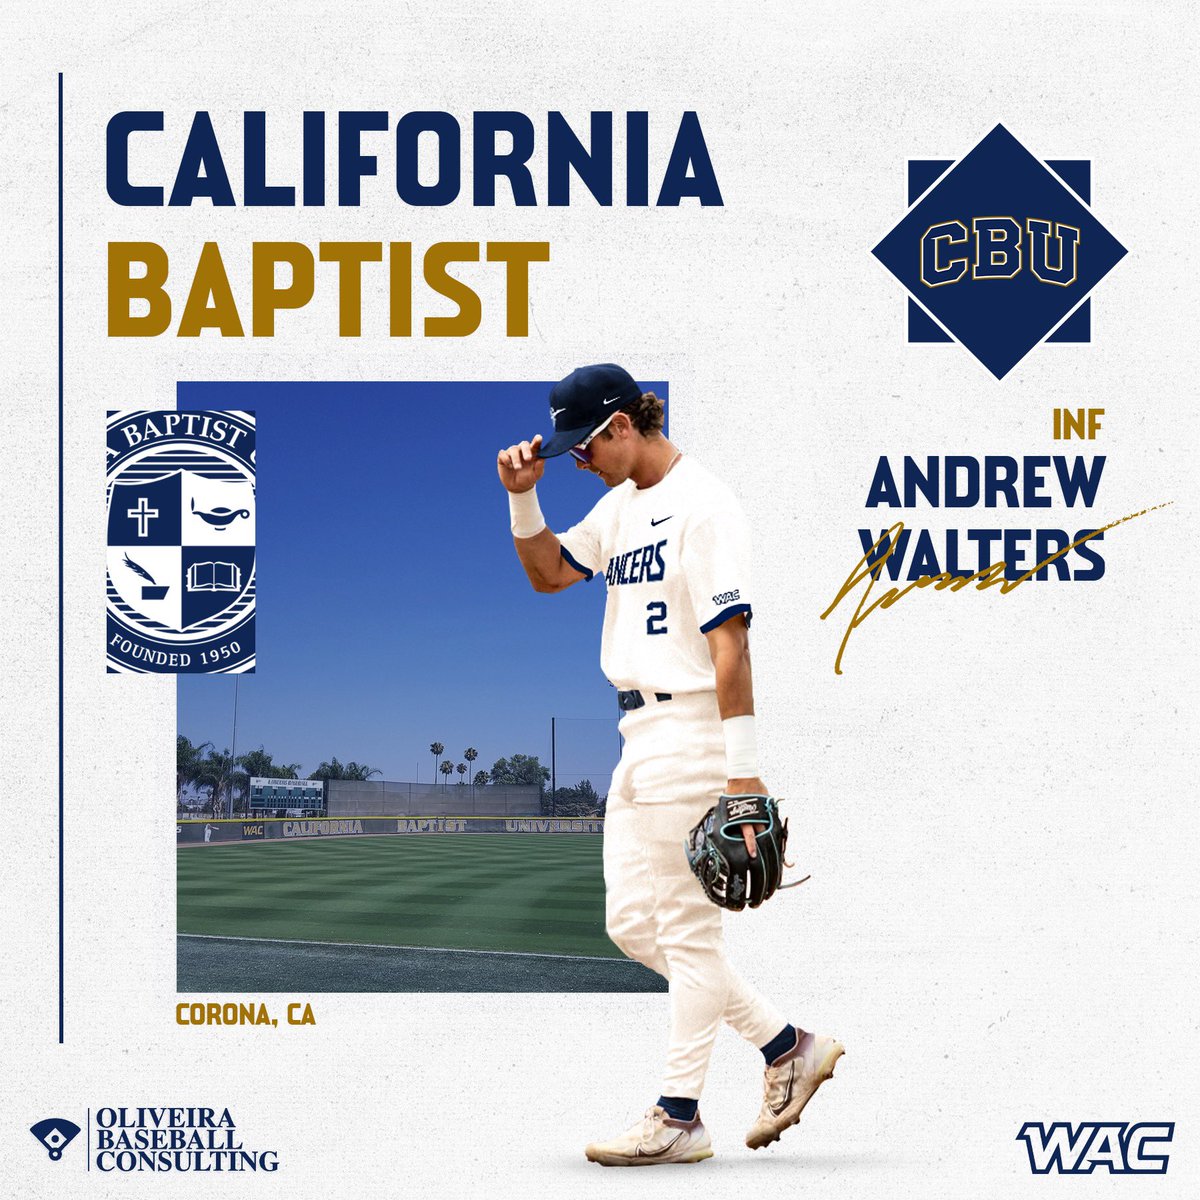 Congrats to Andrew Walters on his commitment to California Baptist University. The Lancers are keeping a premium JUCO player close to home in Riverside. Fired up for the Walters family! #CBU #LanceUp ⚔️ #WAC #Committed #OBC @andrewwww_54